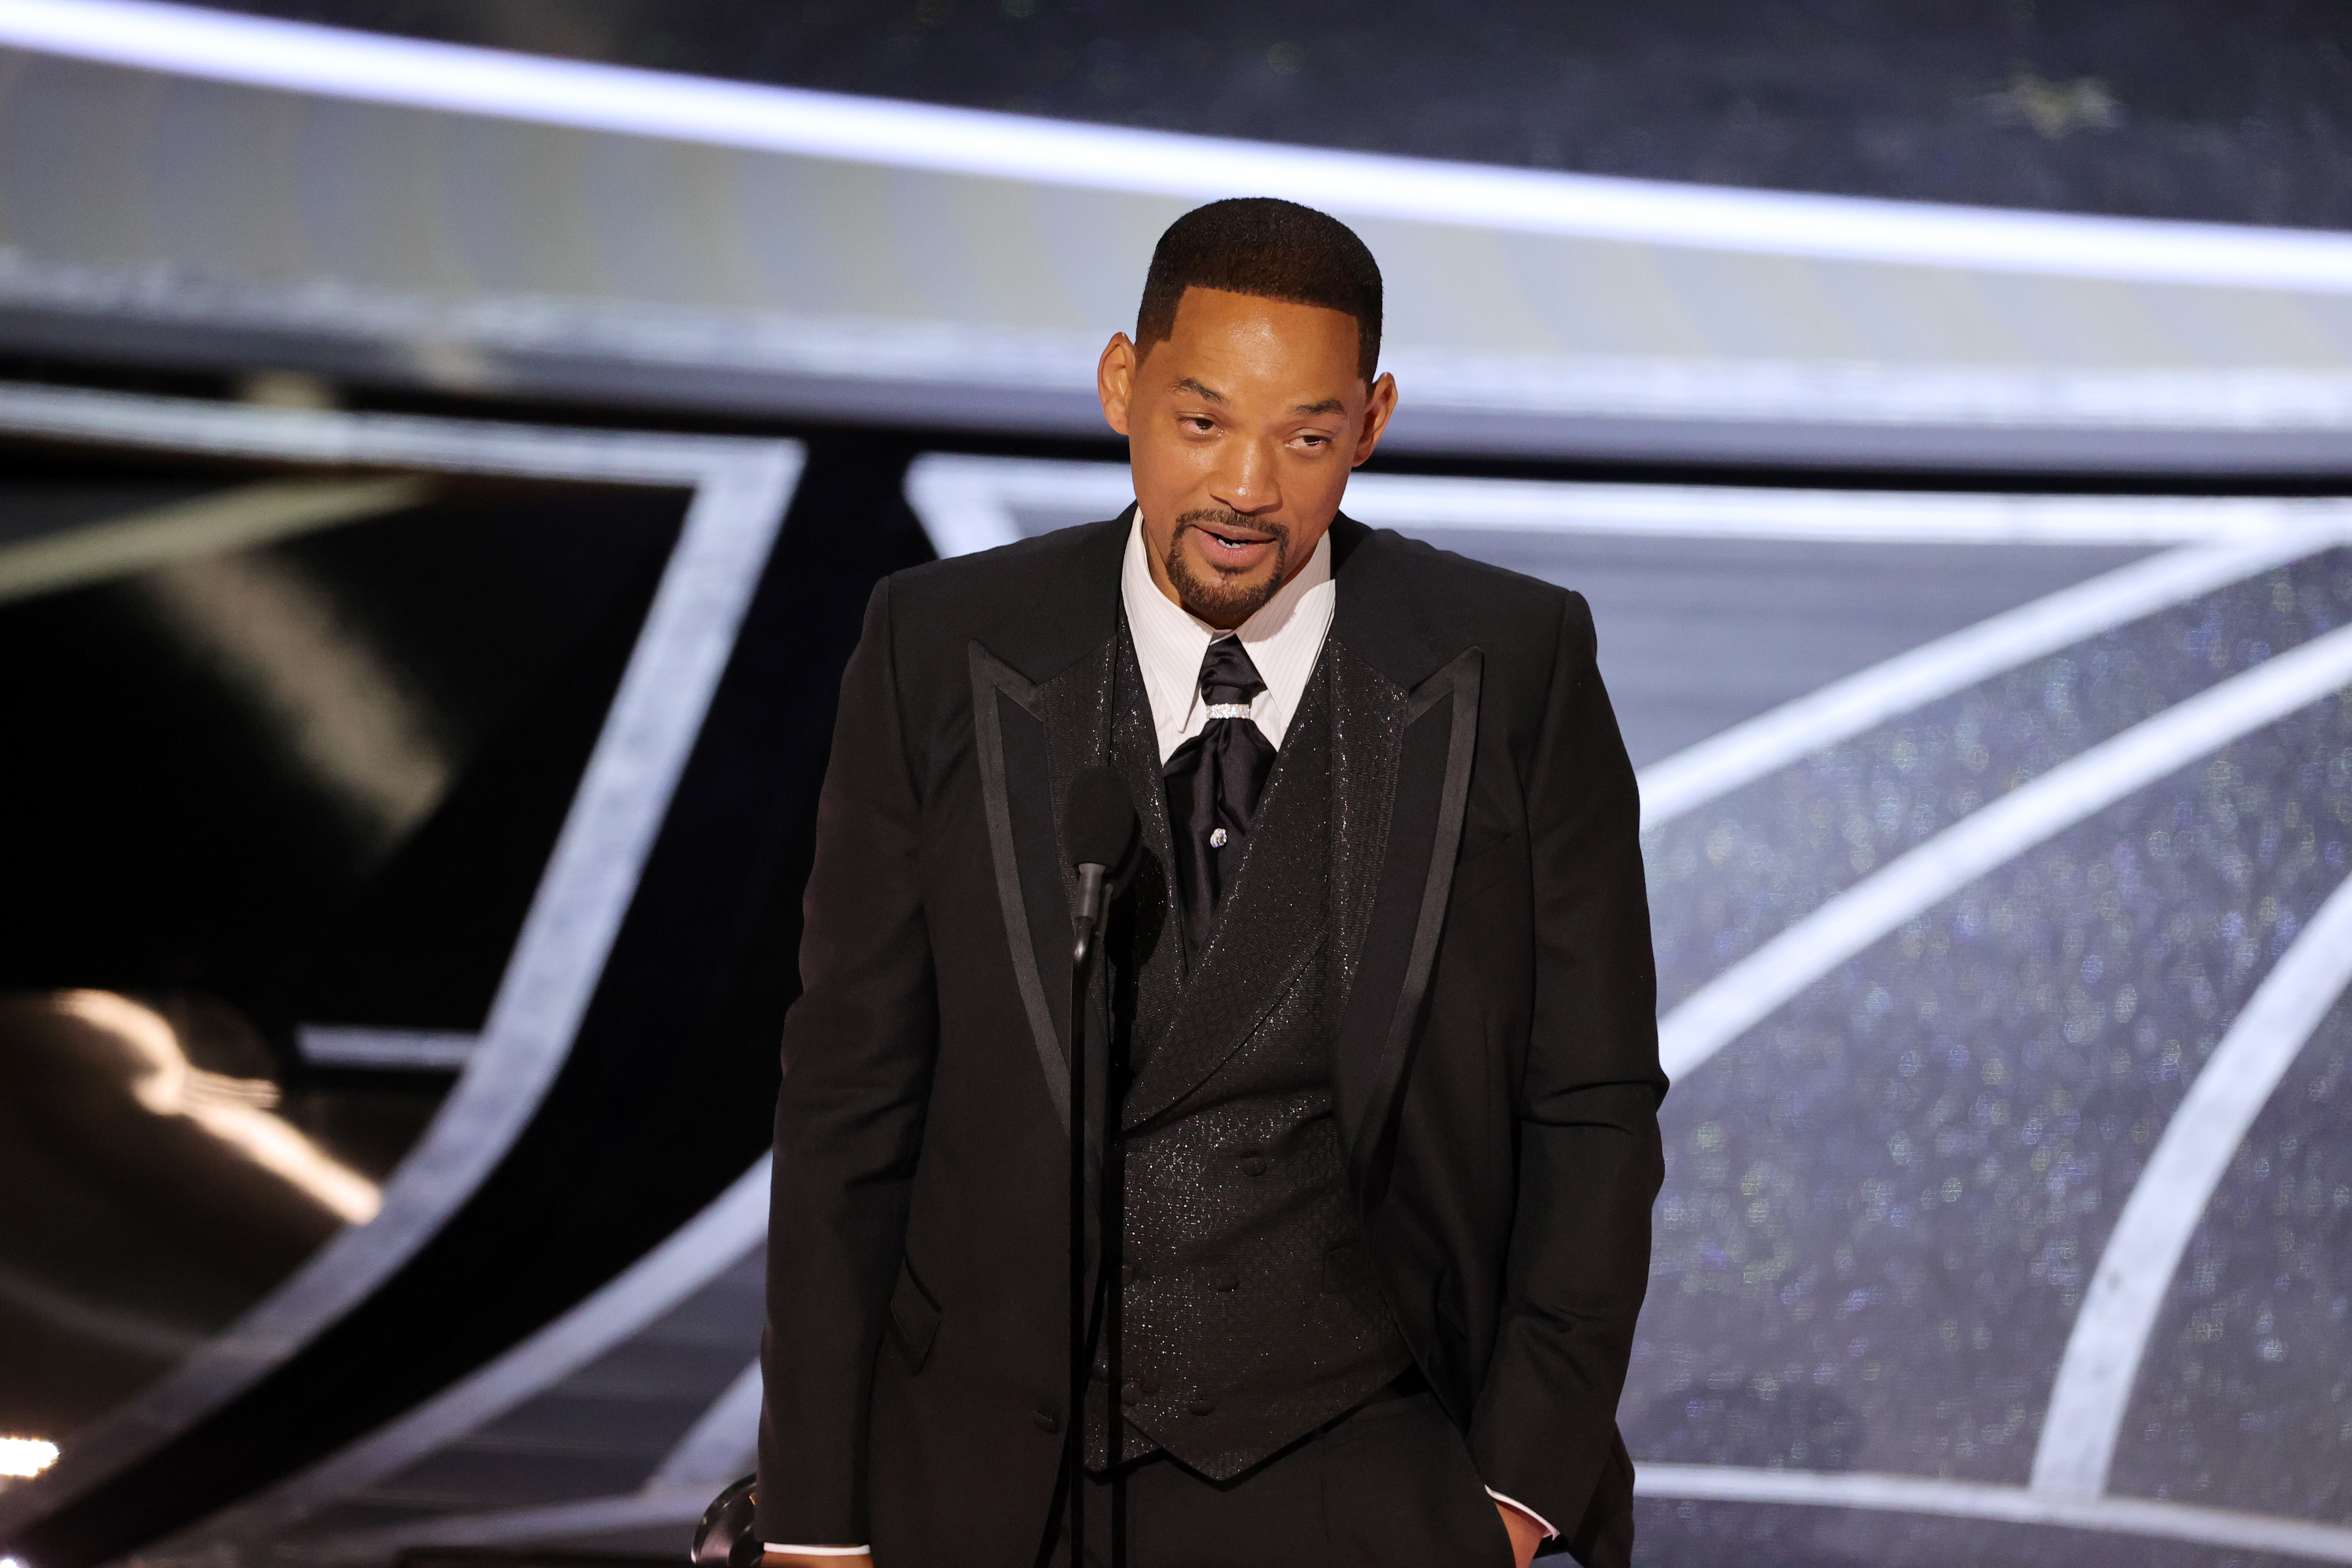 Will Smith, Opening up About Oscars Slap, Tells Trevor Noah ‘Hurt People Hurt People’